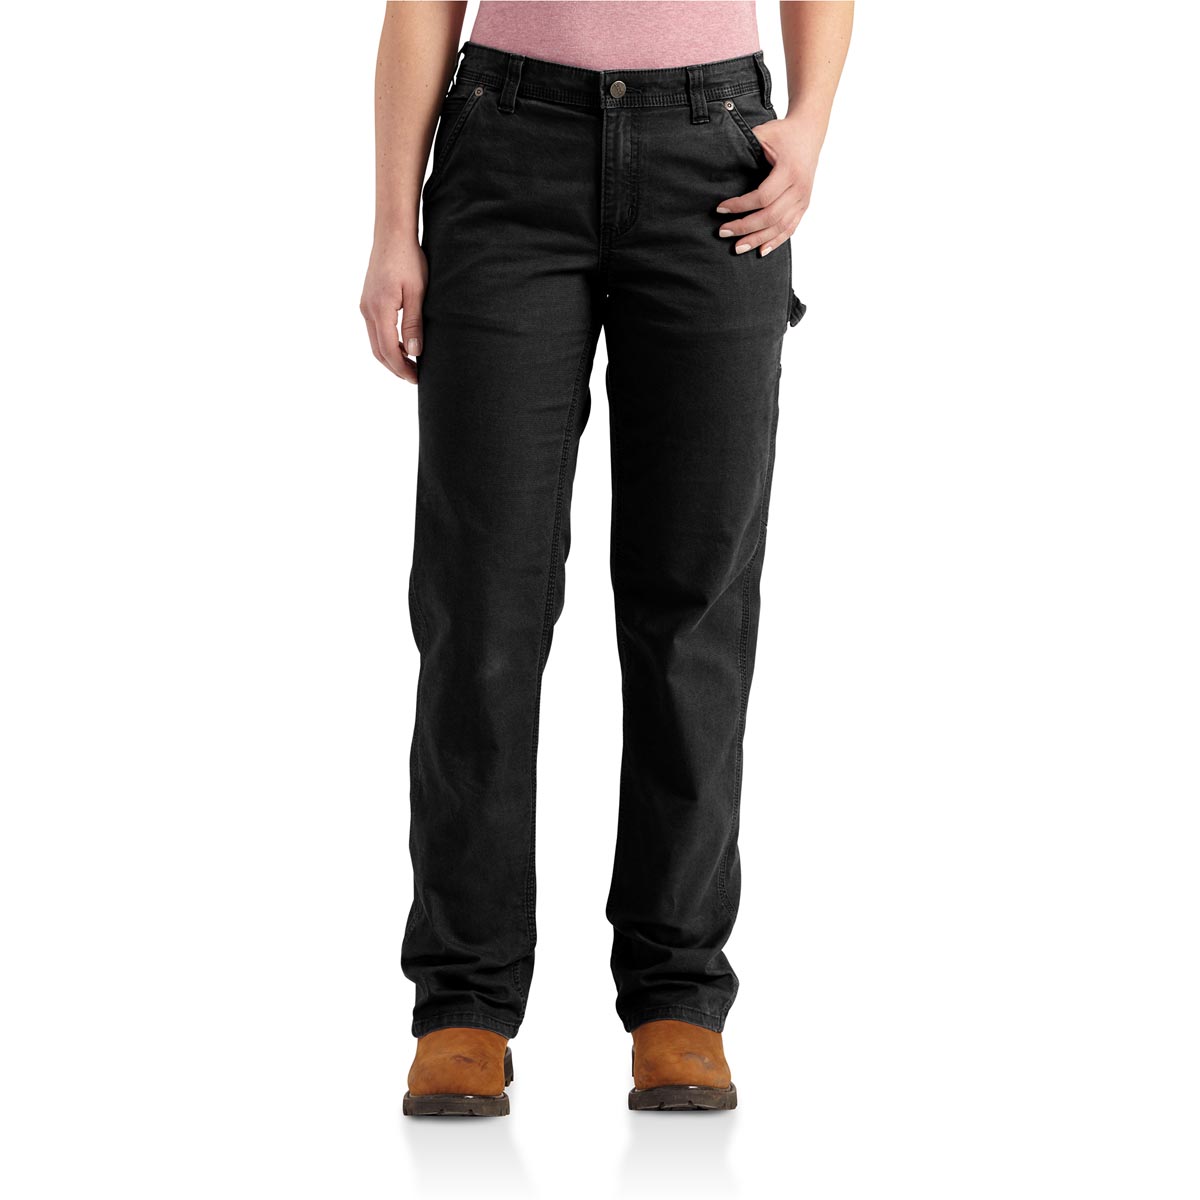 Carhartt Women's Relaxed Fit Canvas Work Pants - Black